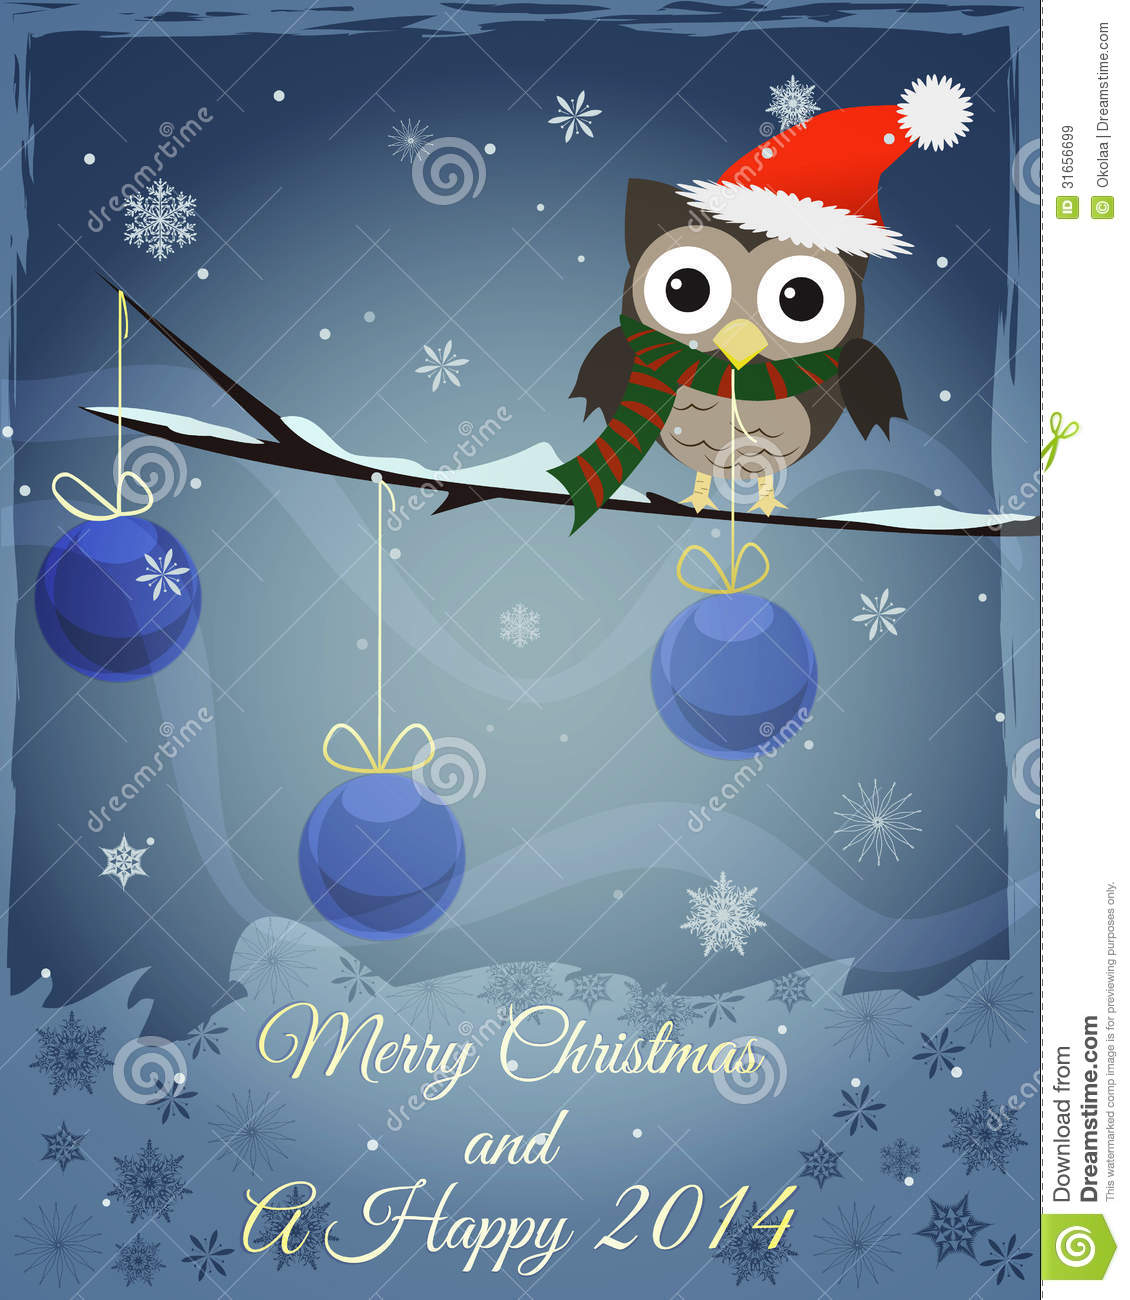 Owl Marry Christmas And Happy New 2014 Royalty Free Stock Images    